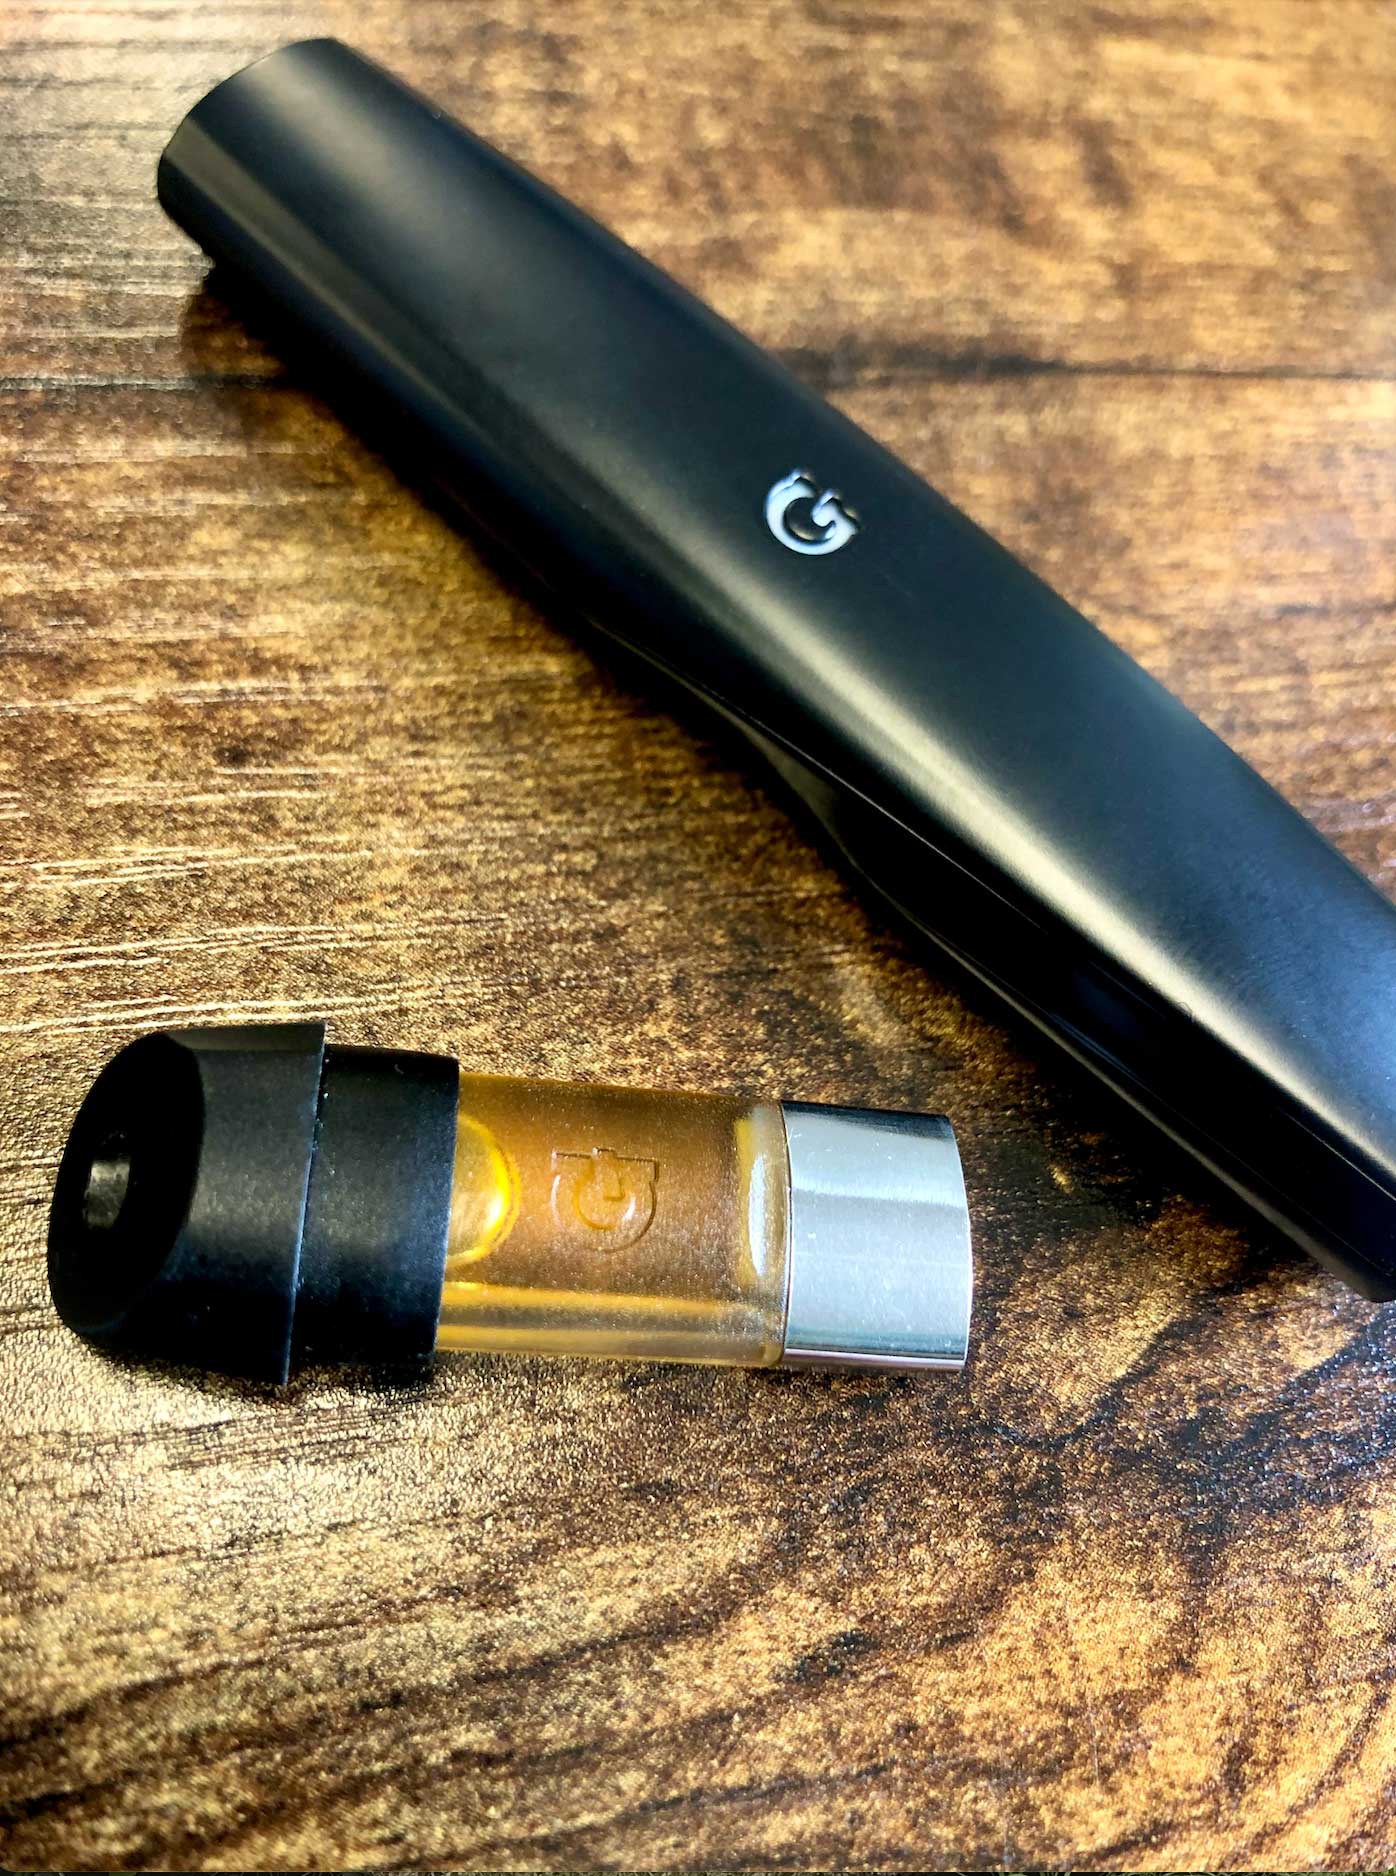 Heirloom Collective G Pen w/ Gio Cartridges